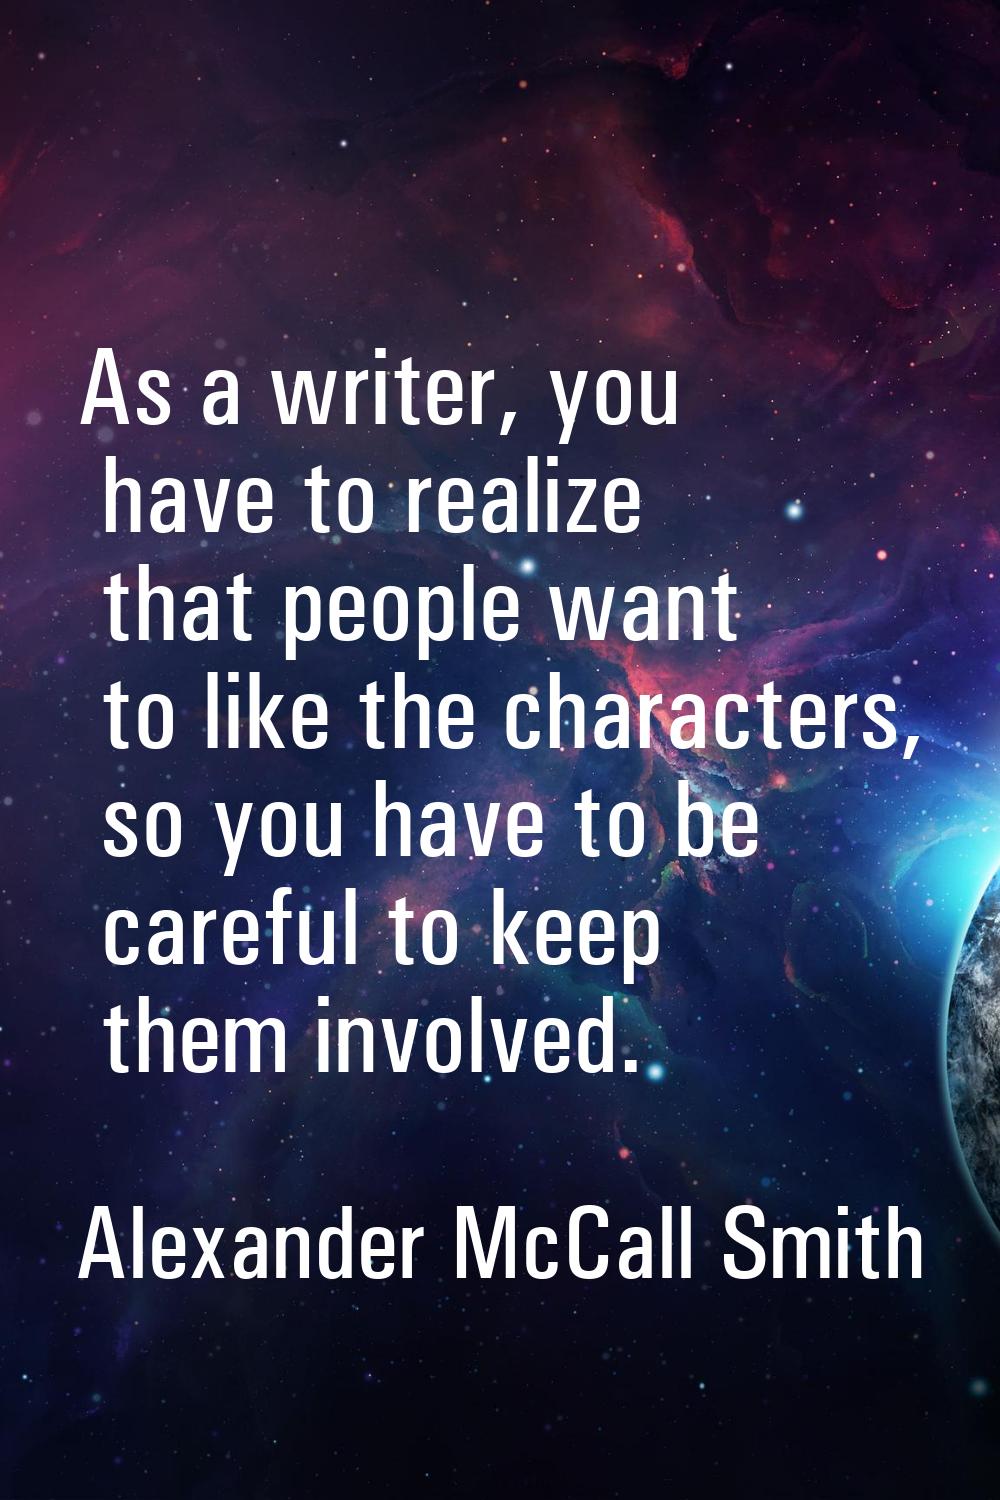 As a writer, you have to realize that people want to like the characters, so you have to be careful